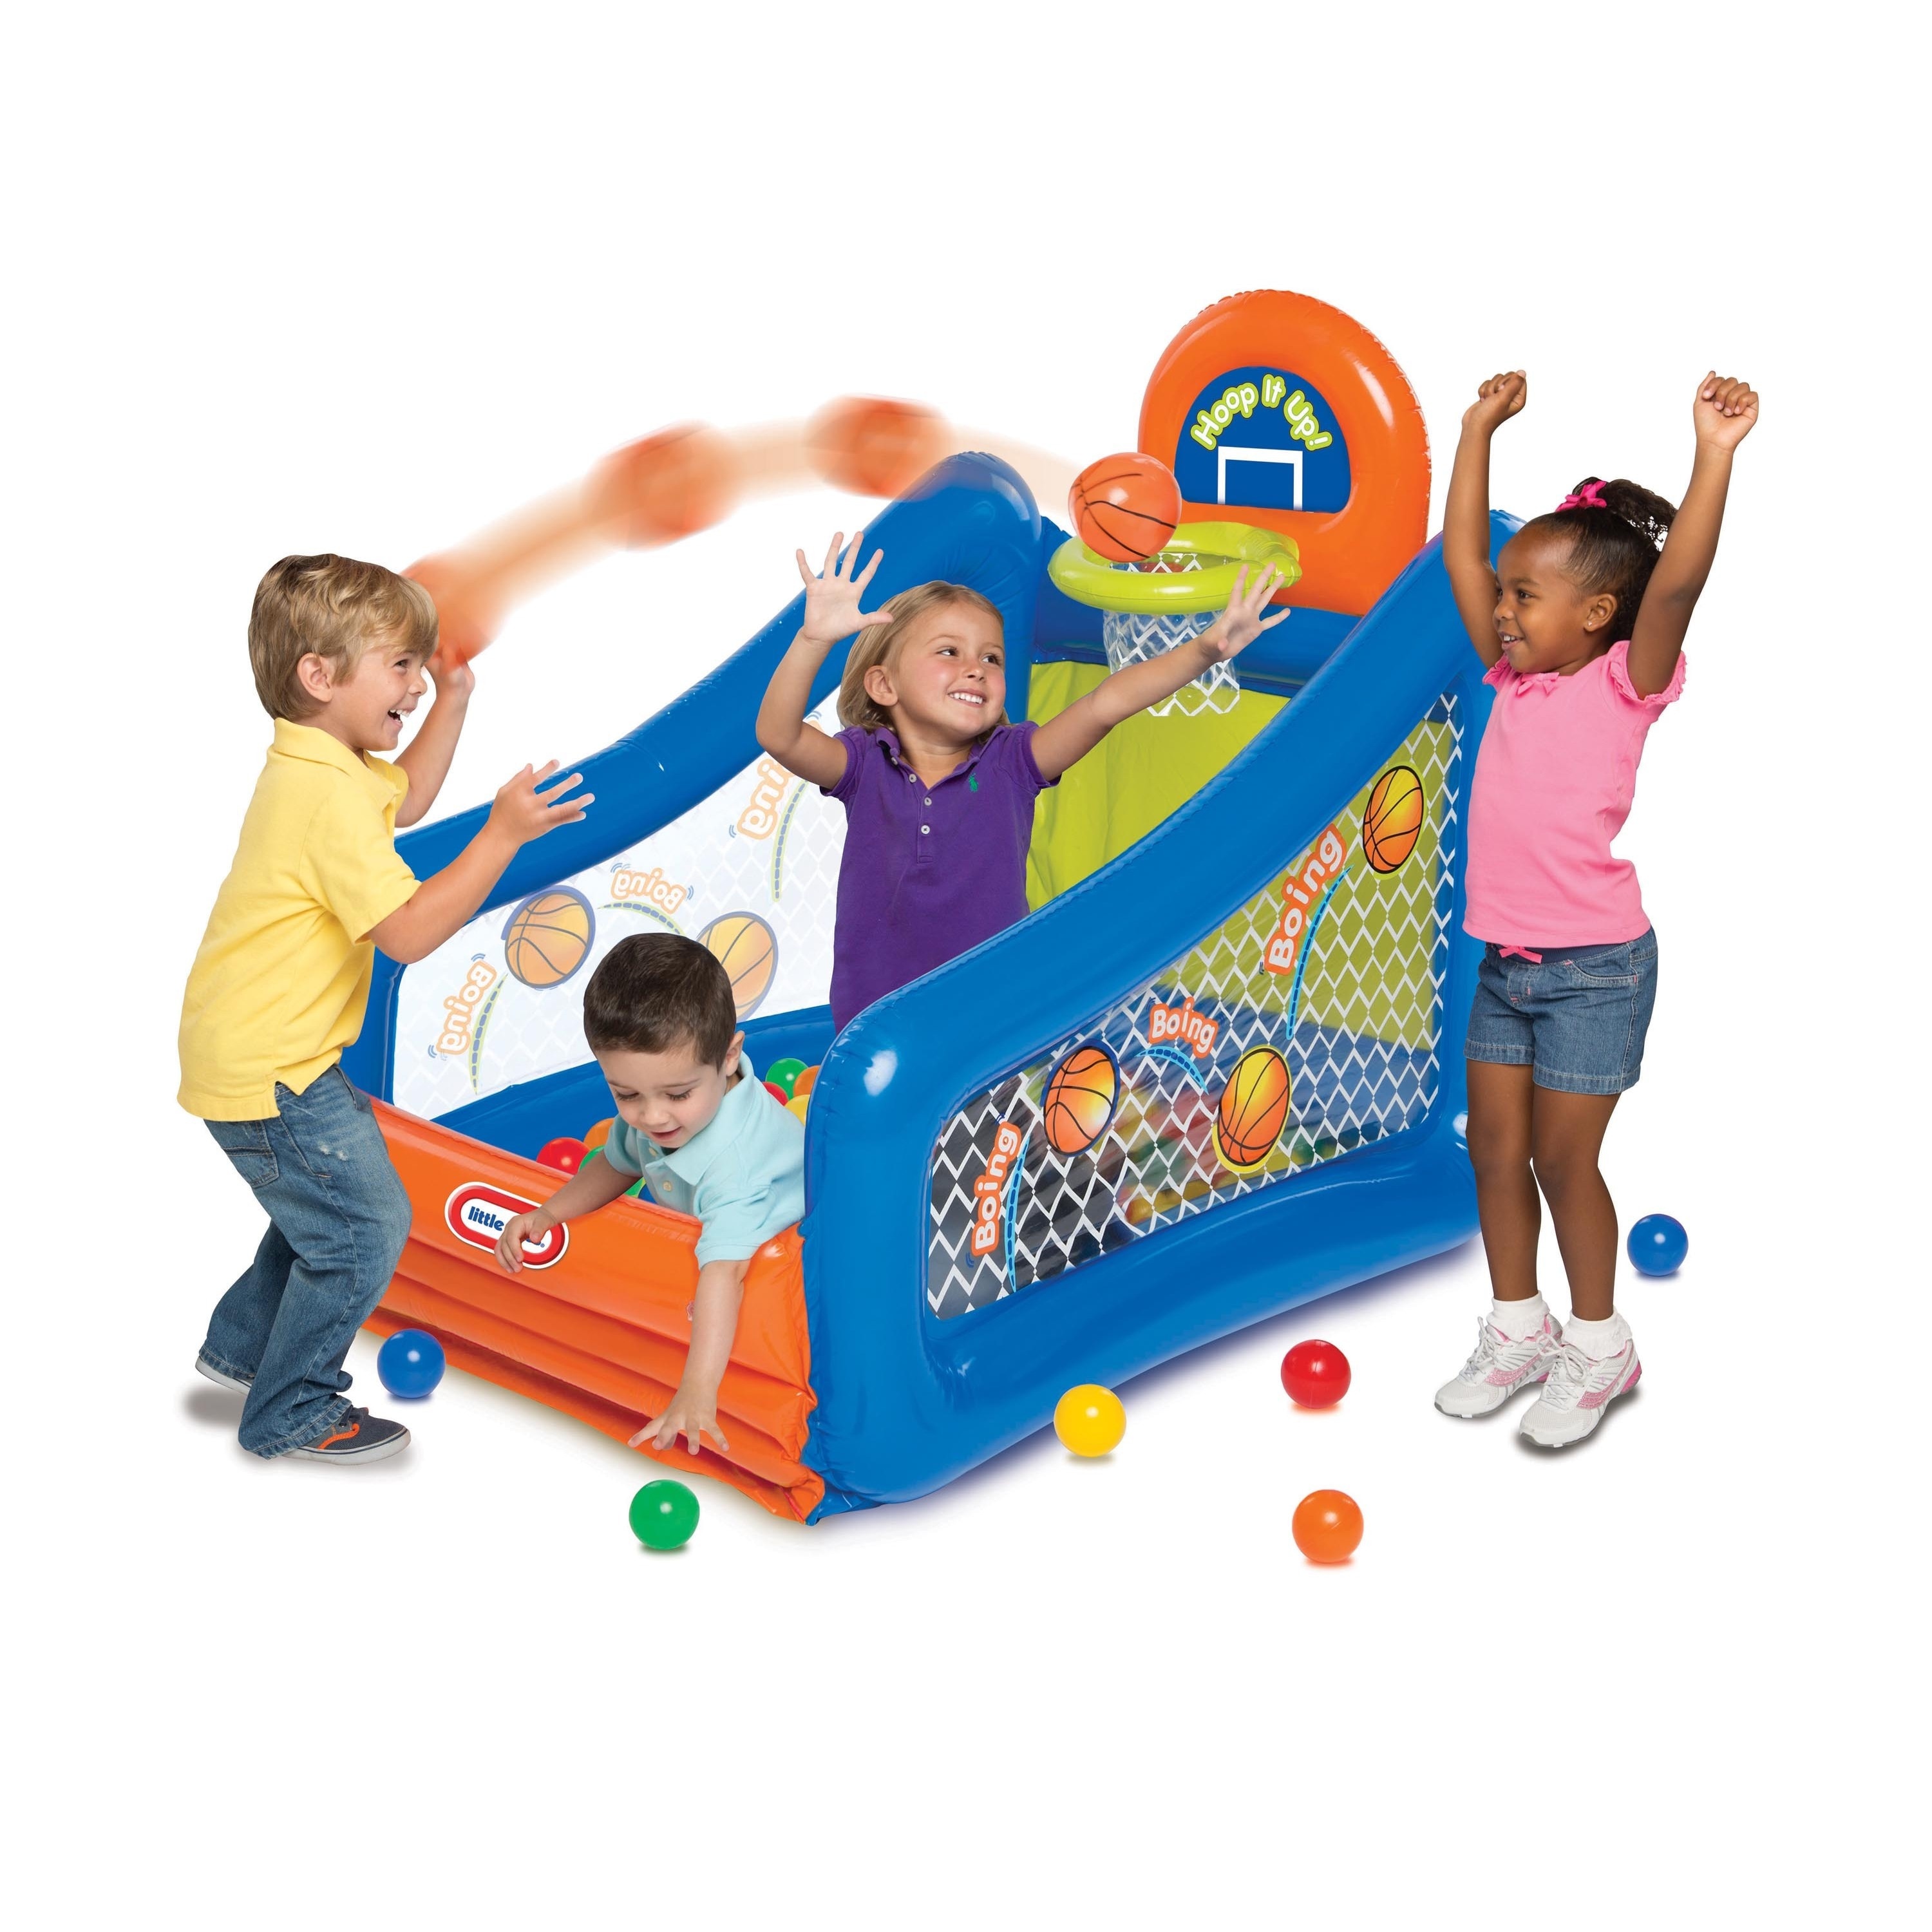 little tikes 3 in 1 sports activity center